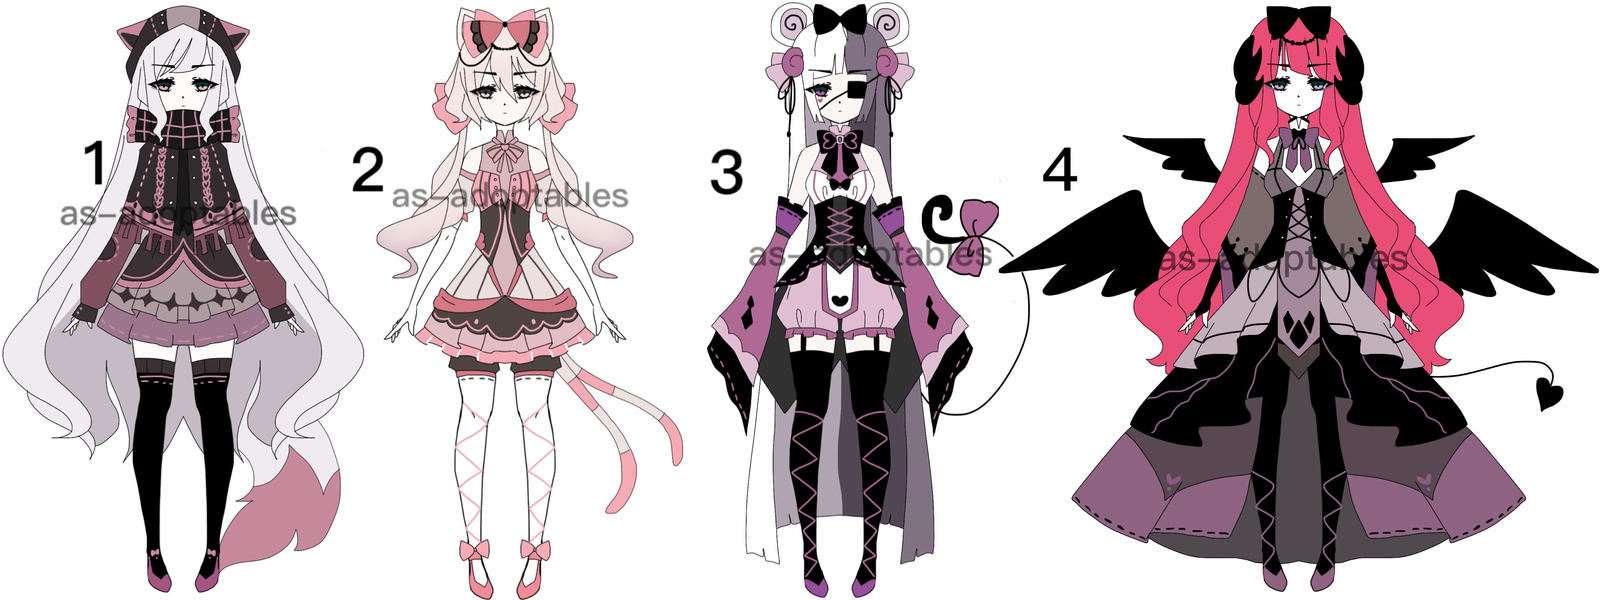 victorian kemonomimi adoptable batch CLOSED by AS-Adoptables on DeviantArt